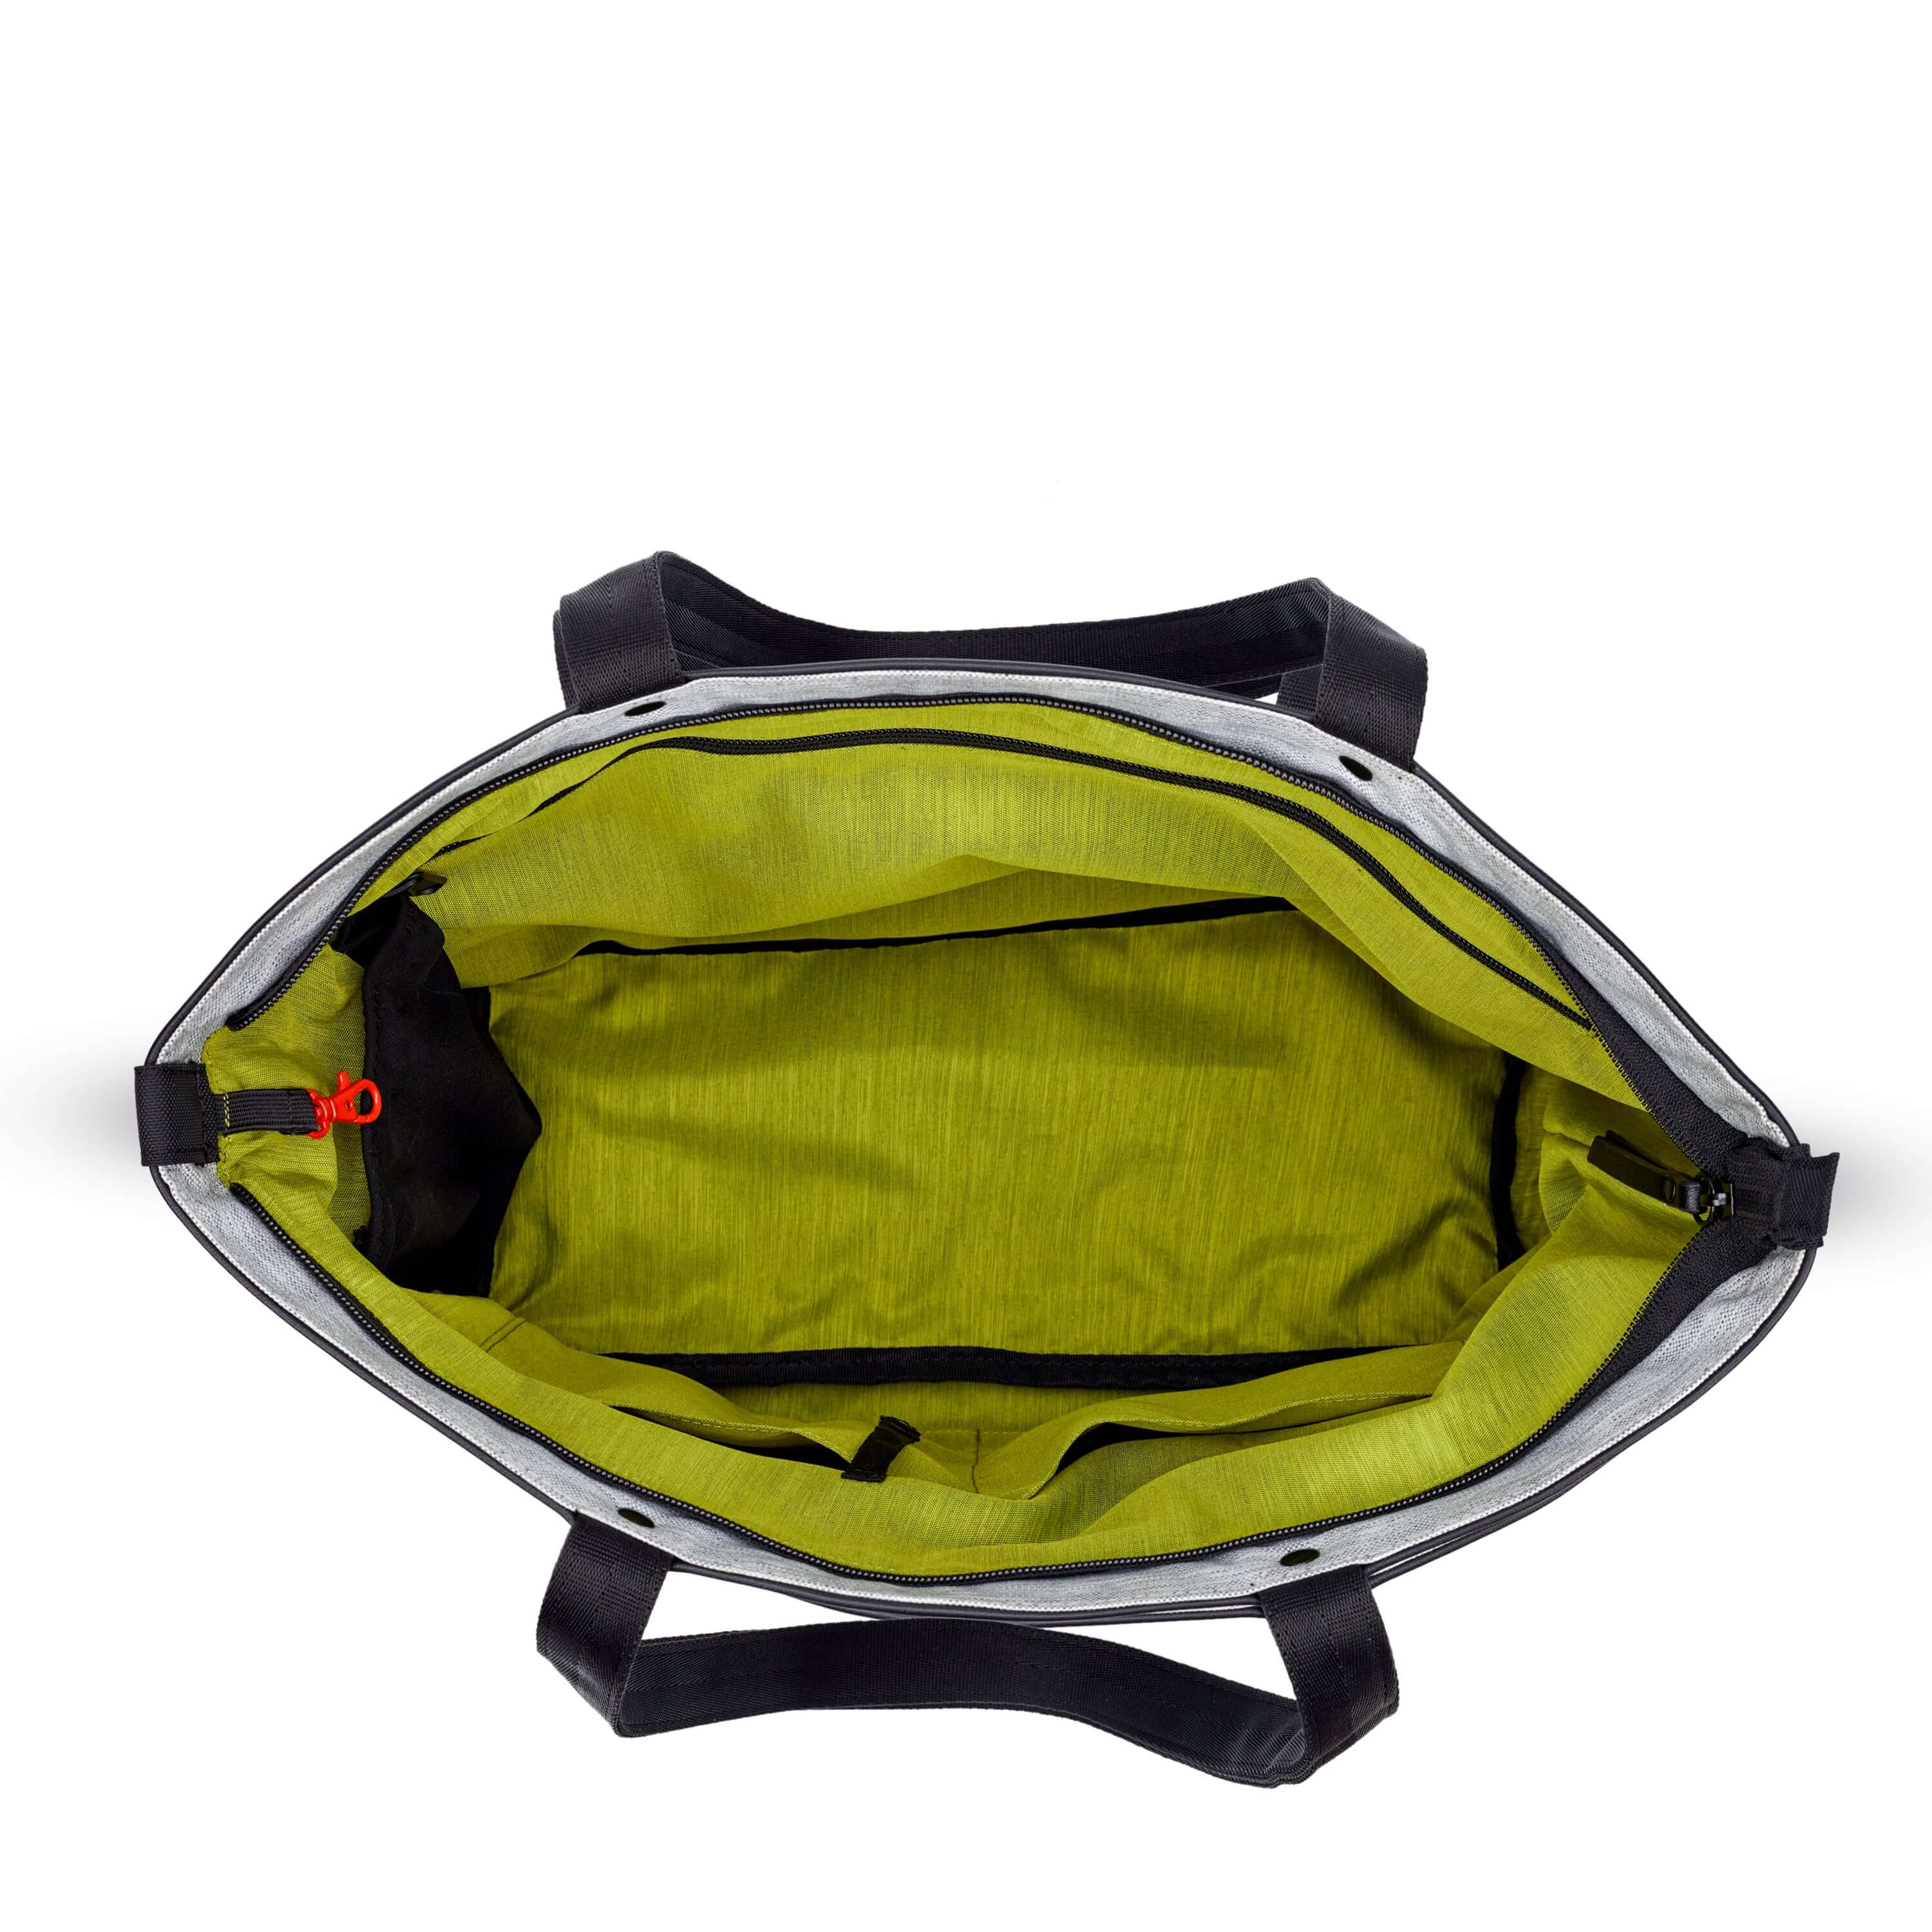 Top view of Sherpani&#39;s Anti-Theft tote the Cali AT in Sterling. The main zipper compartment is open to reveal a lime green interior, an internal water bottle holder and a red carabiner that acts as the zipper lock. 